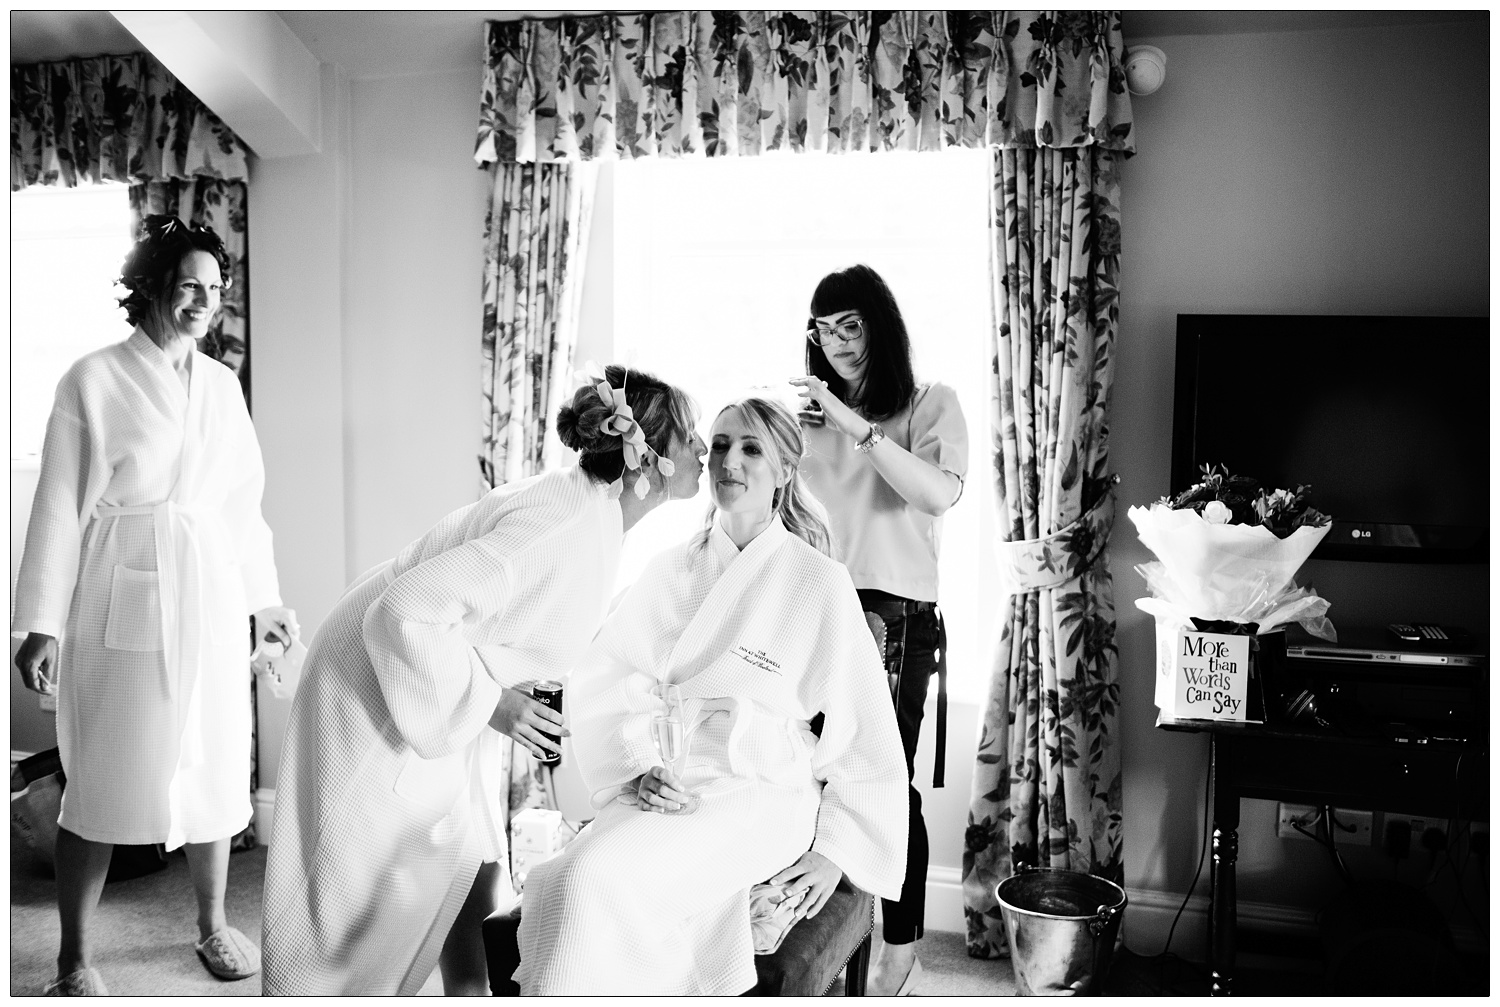 A woman goes to kiss a bride sitting on a chair. She is having her hair done.